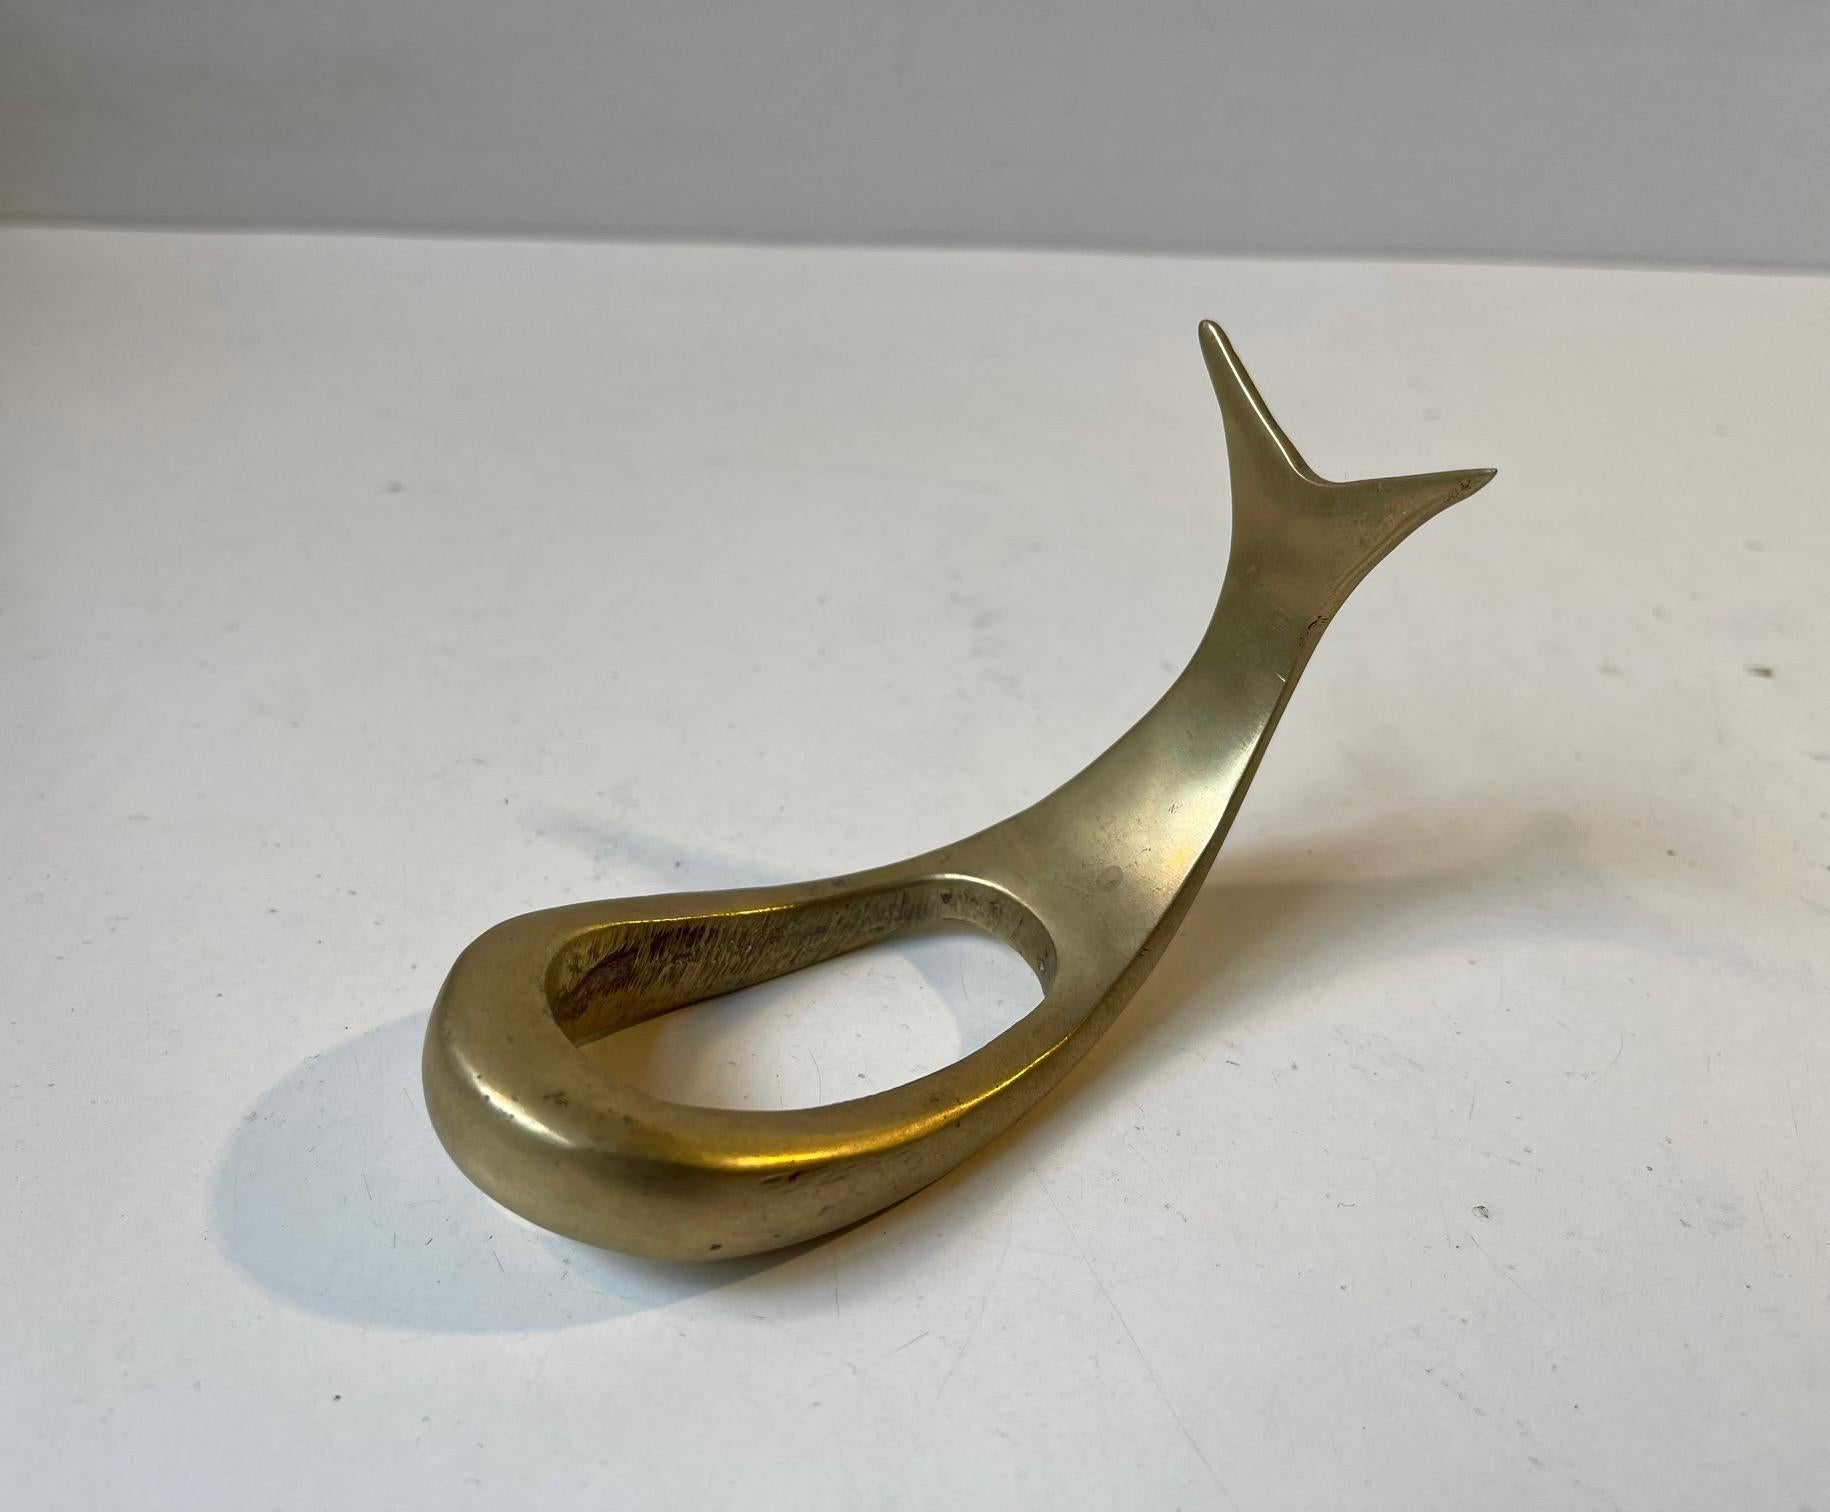 A vintage pipe stand / holder in the shape of a whale / fish. Its executed in solid brass. Originally sold at Illums Bolighus in Copenhagen during the 1950s. It may have been manufactured by Wiener Werkstatte in Austria but it has no markings.